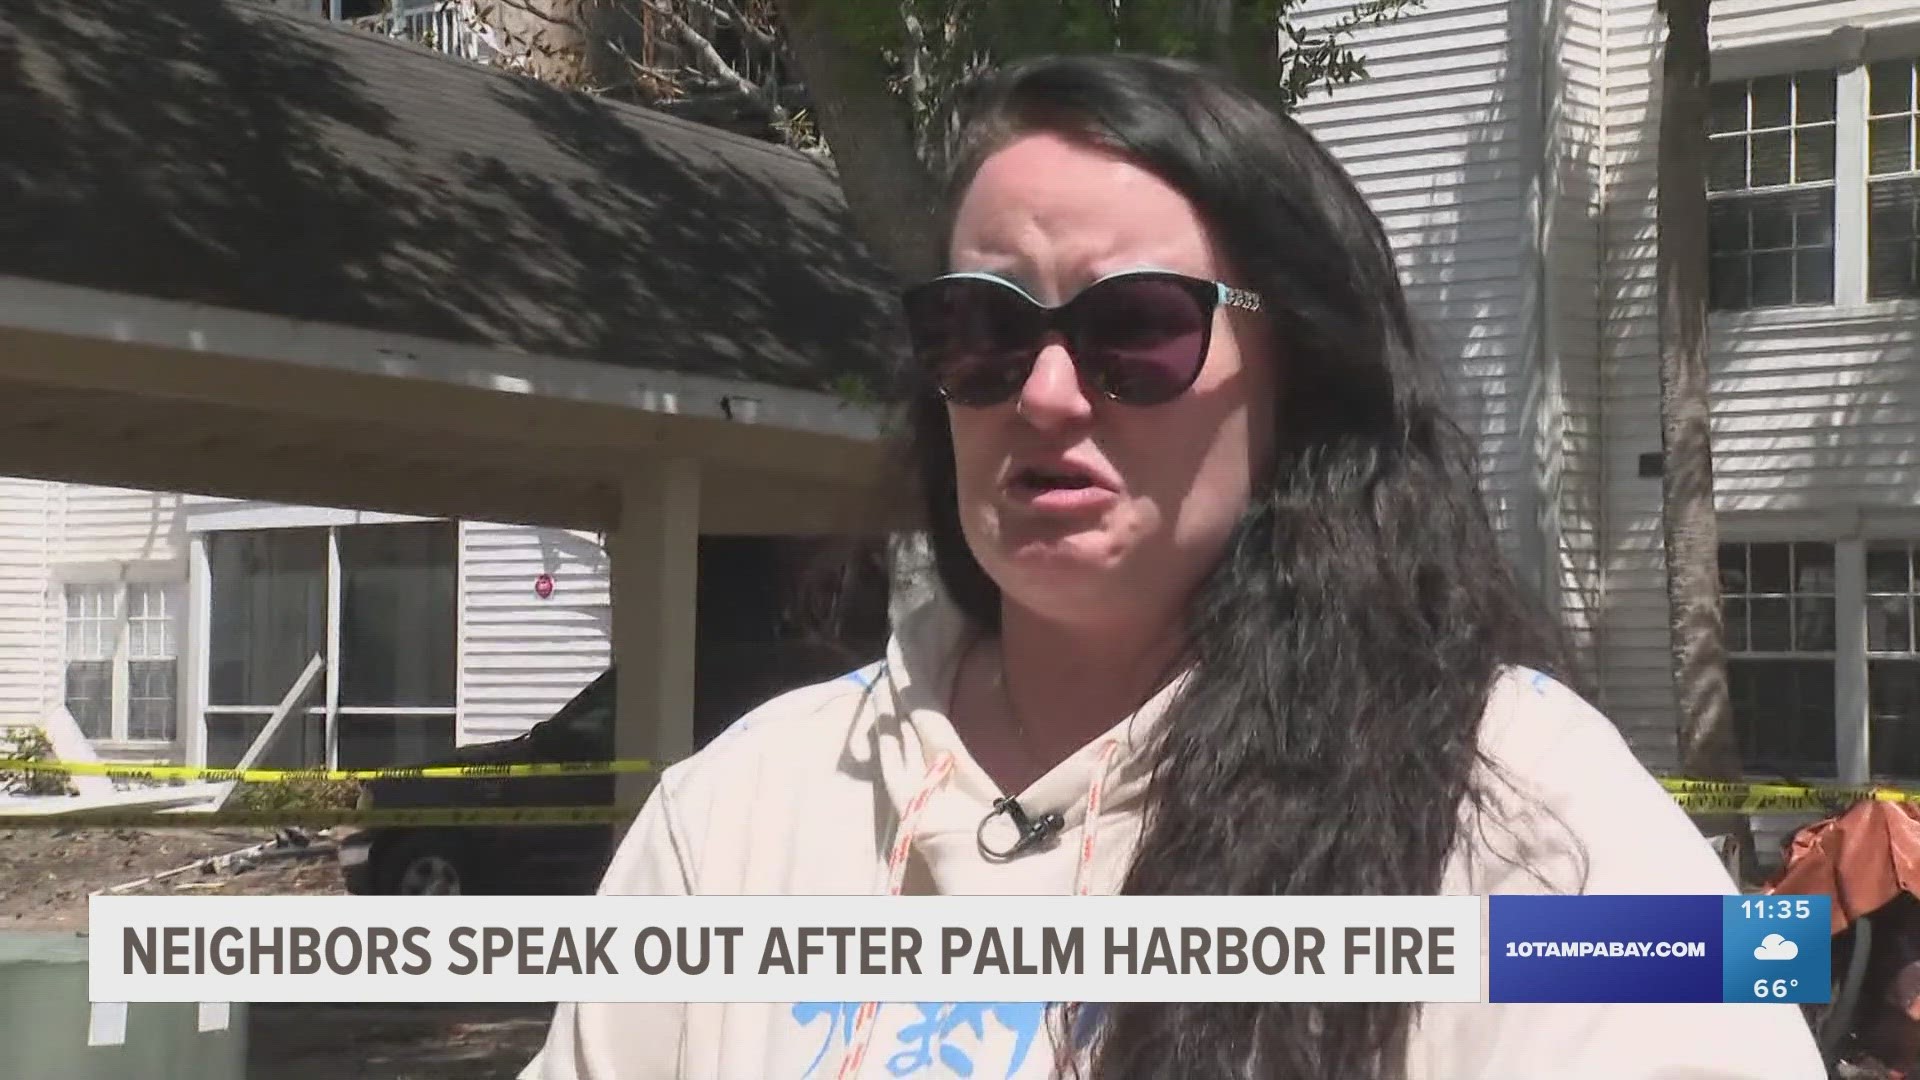 The cause of the fire is still being investigated by the Palm Harbor Fire Rescue.